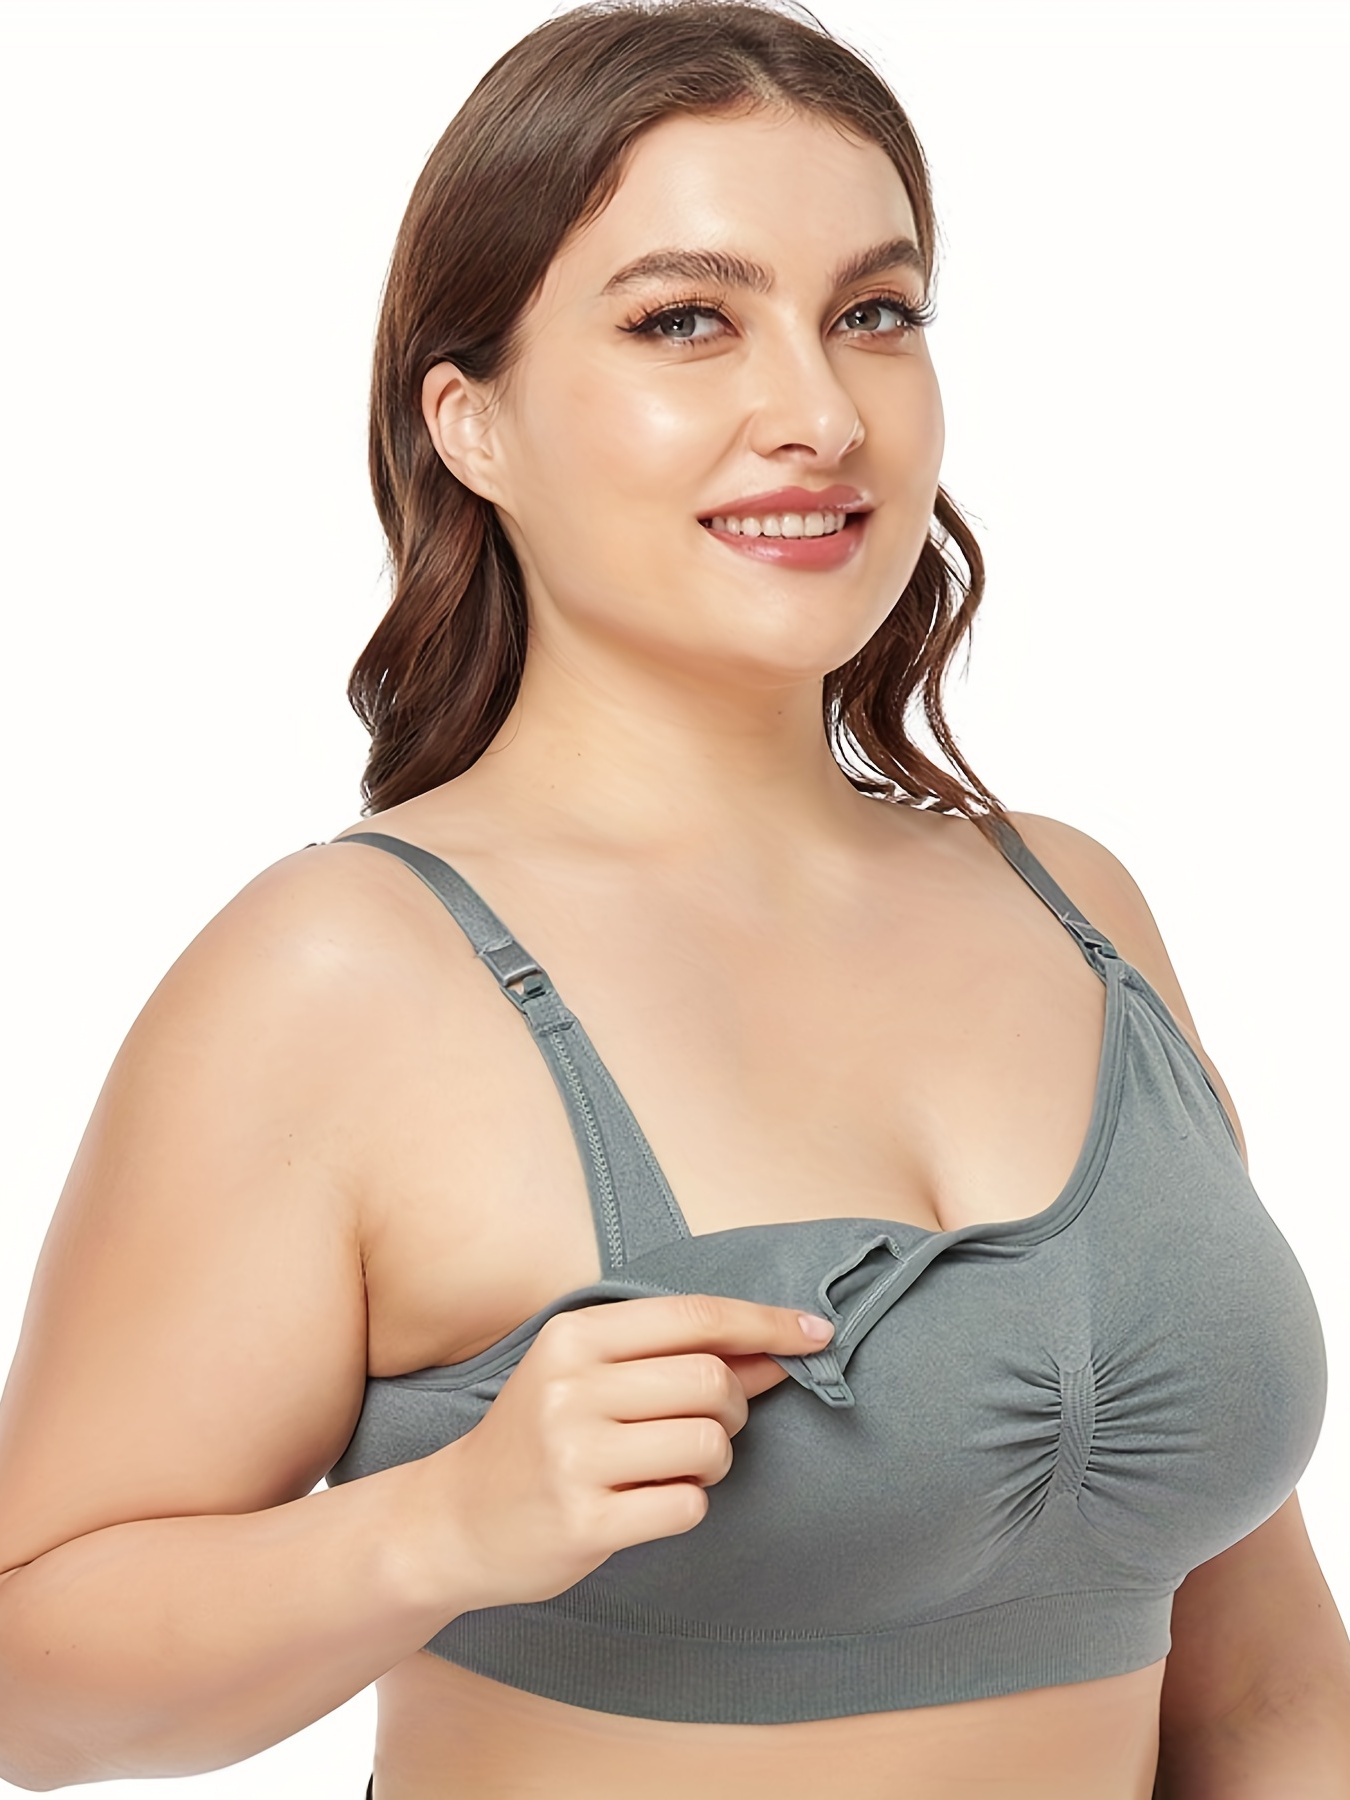 LeeWear Women Nursing Button Front Closure Bras Plus Size Wireless Sleep Bra  (no Pads) Imported from china Cotton pink, cream and apricot color  04_05_10BR22104_Tan1_Qty01